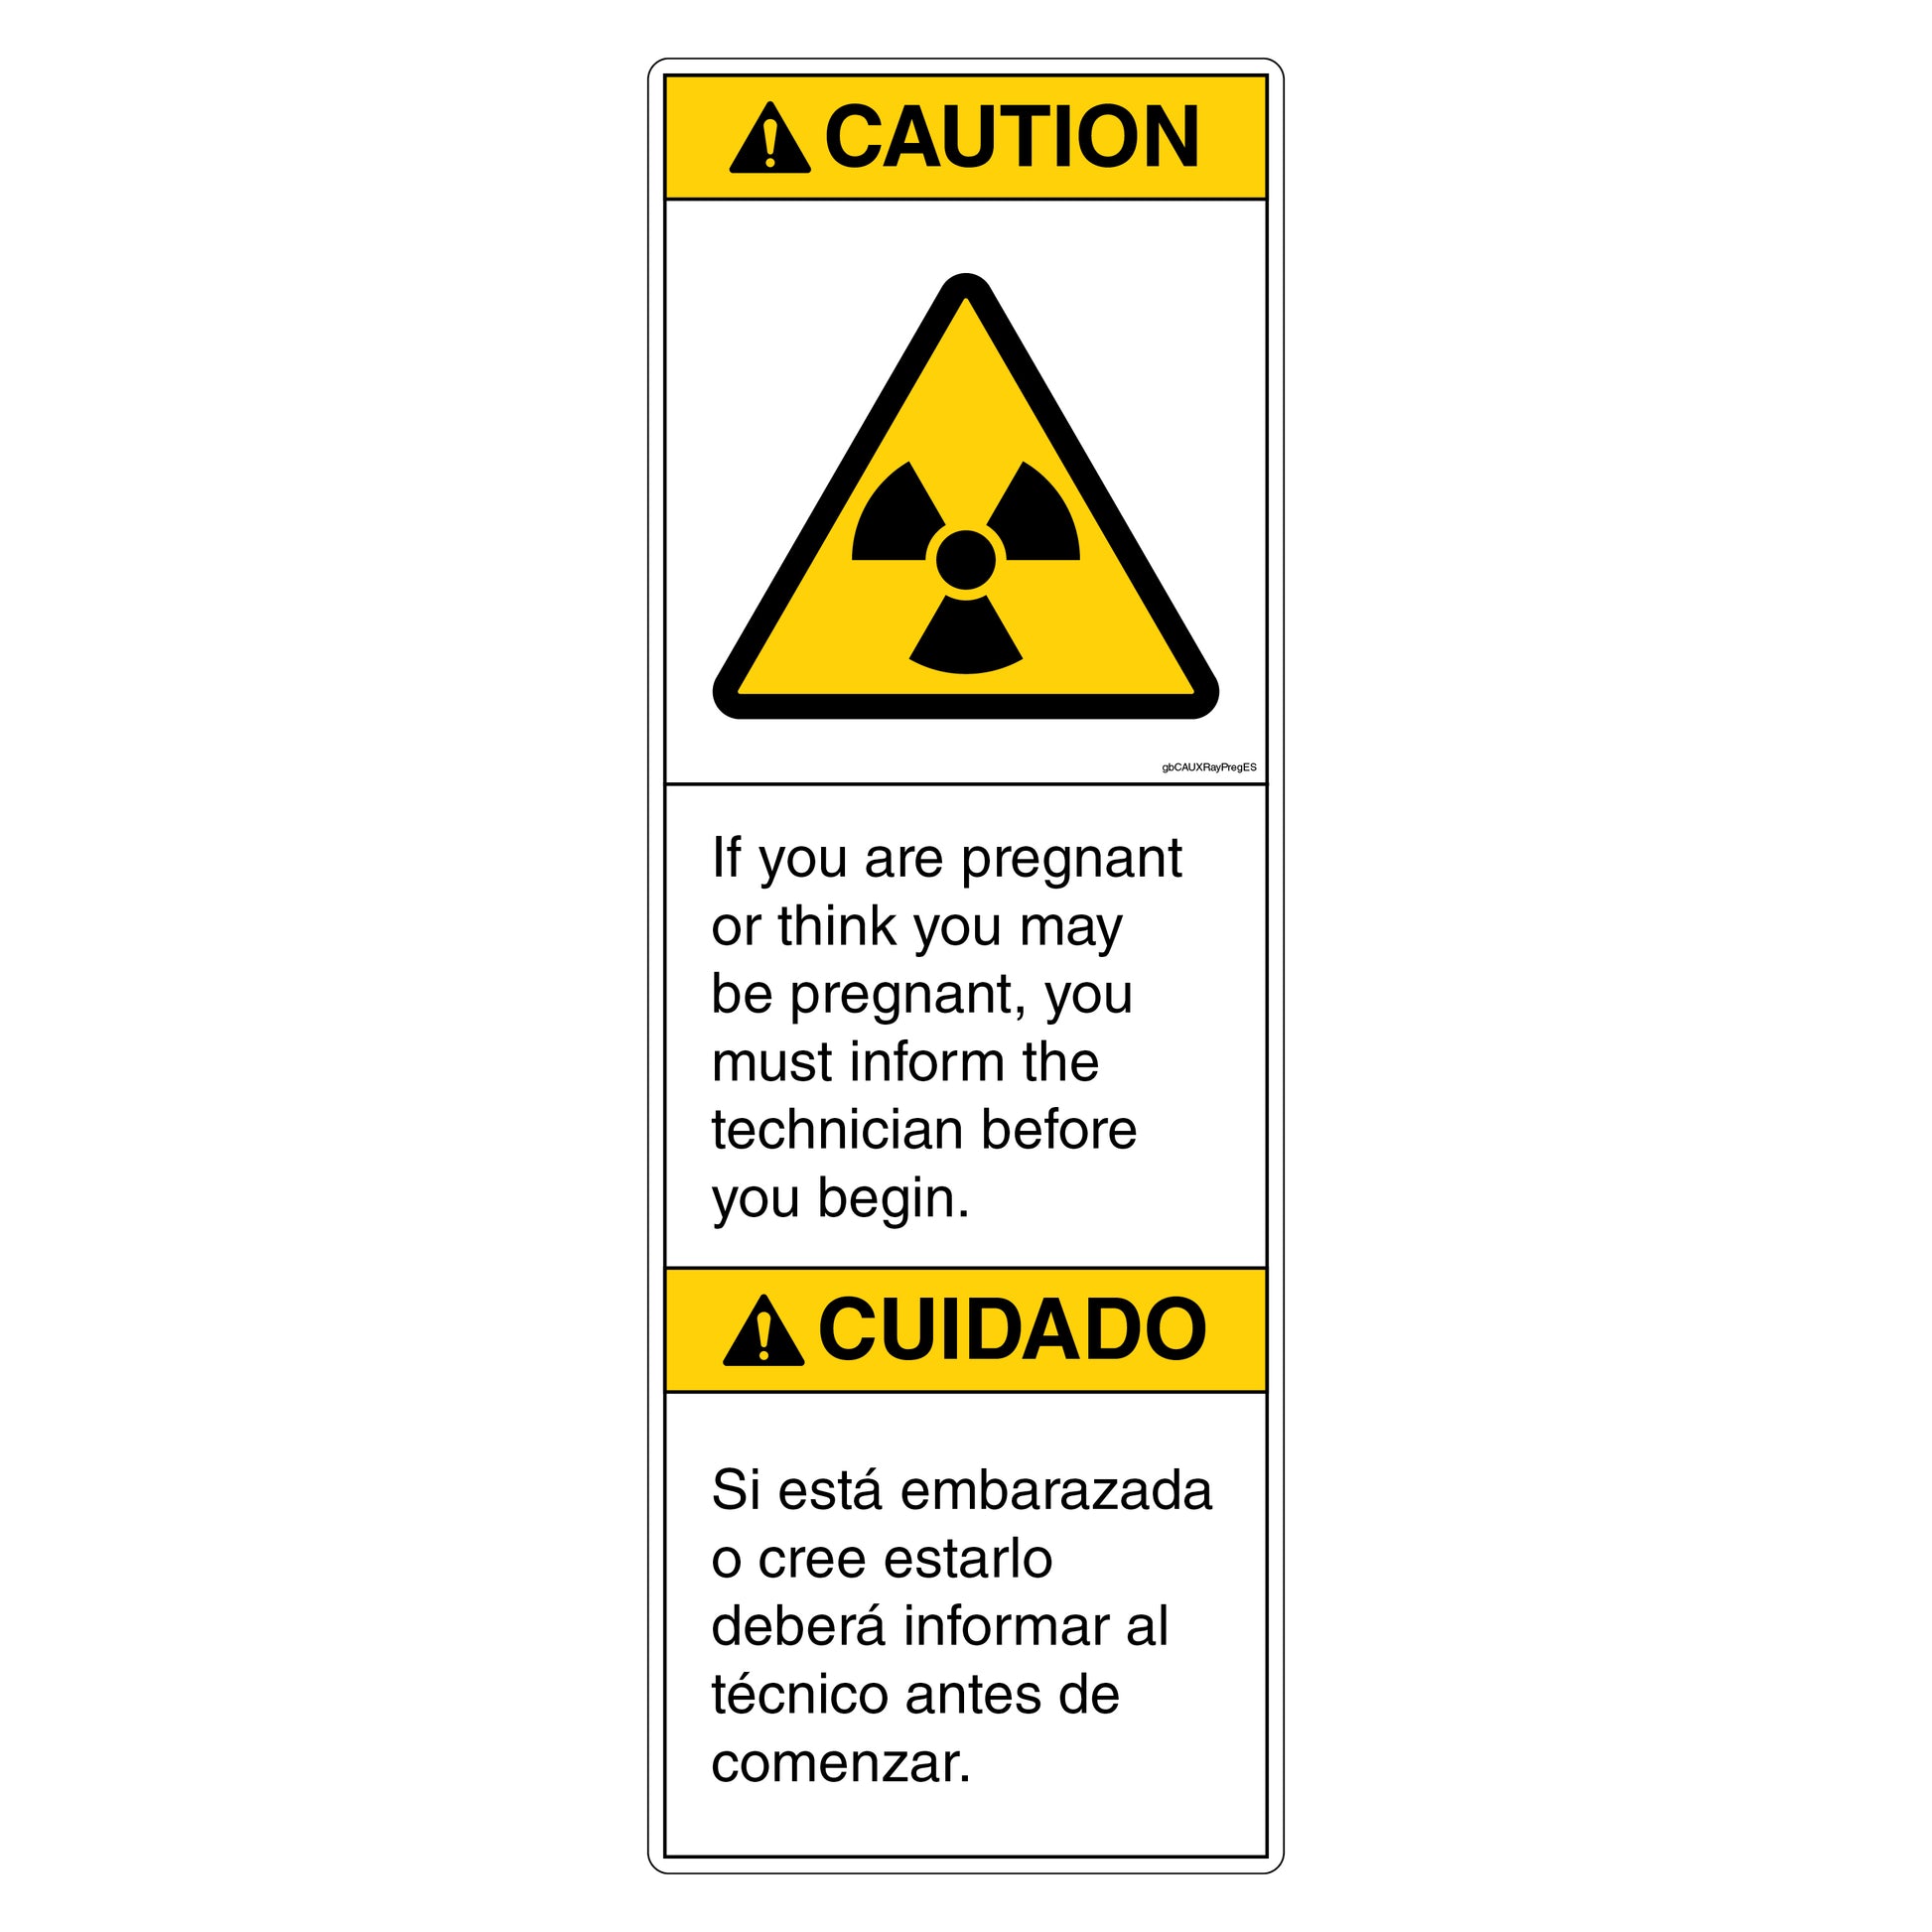 Caution If You Are Pregnant or Think You May Be Pregnant Inform the Technician Decal in English and Spanish.